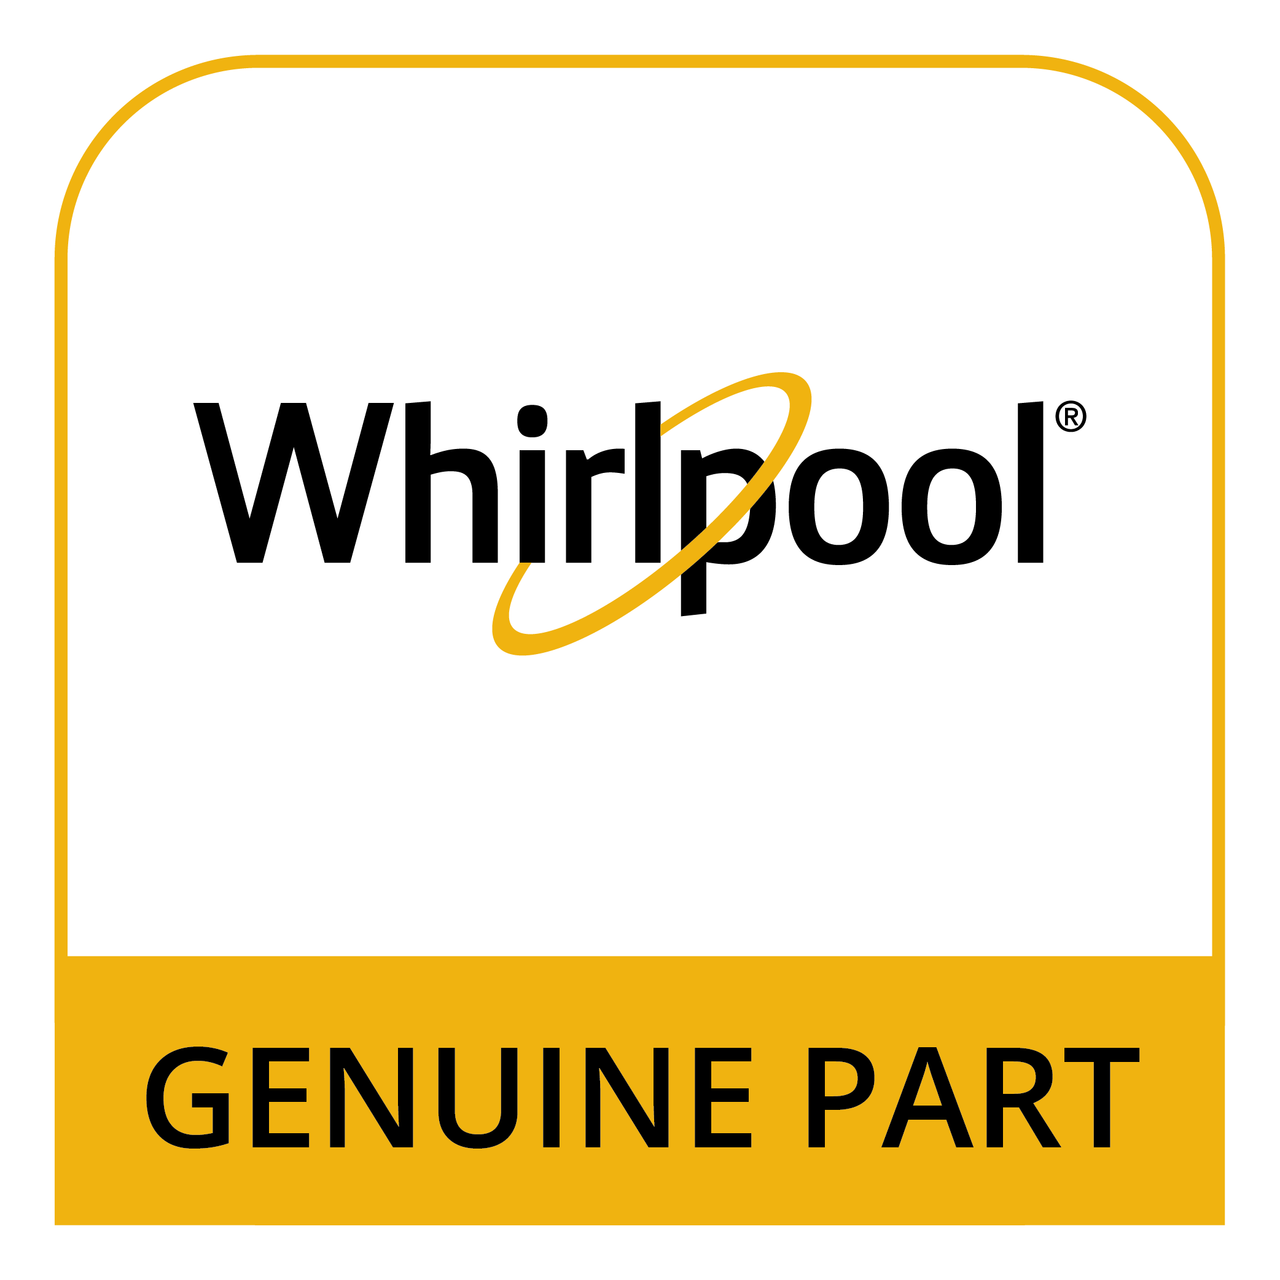 Whirlpool R0807506 - COOKING TRAY - Genuine Part